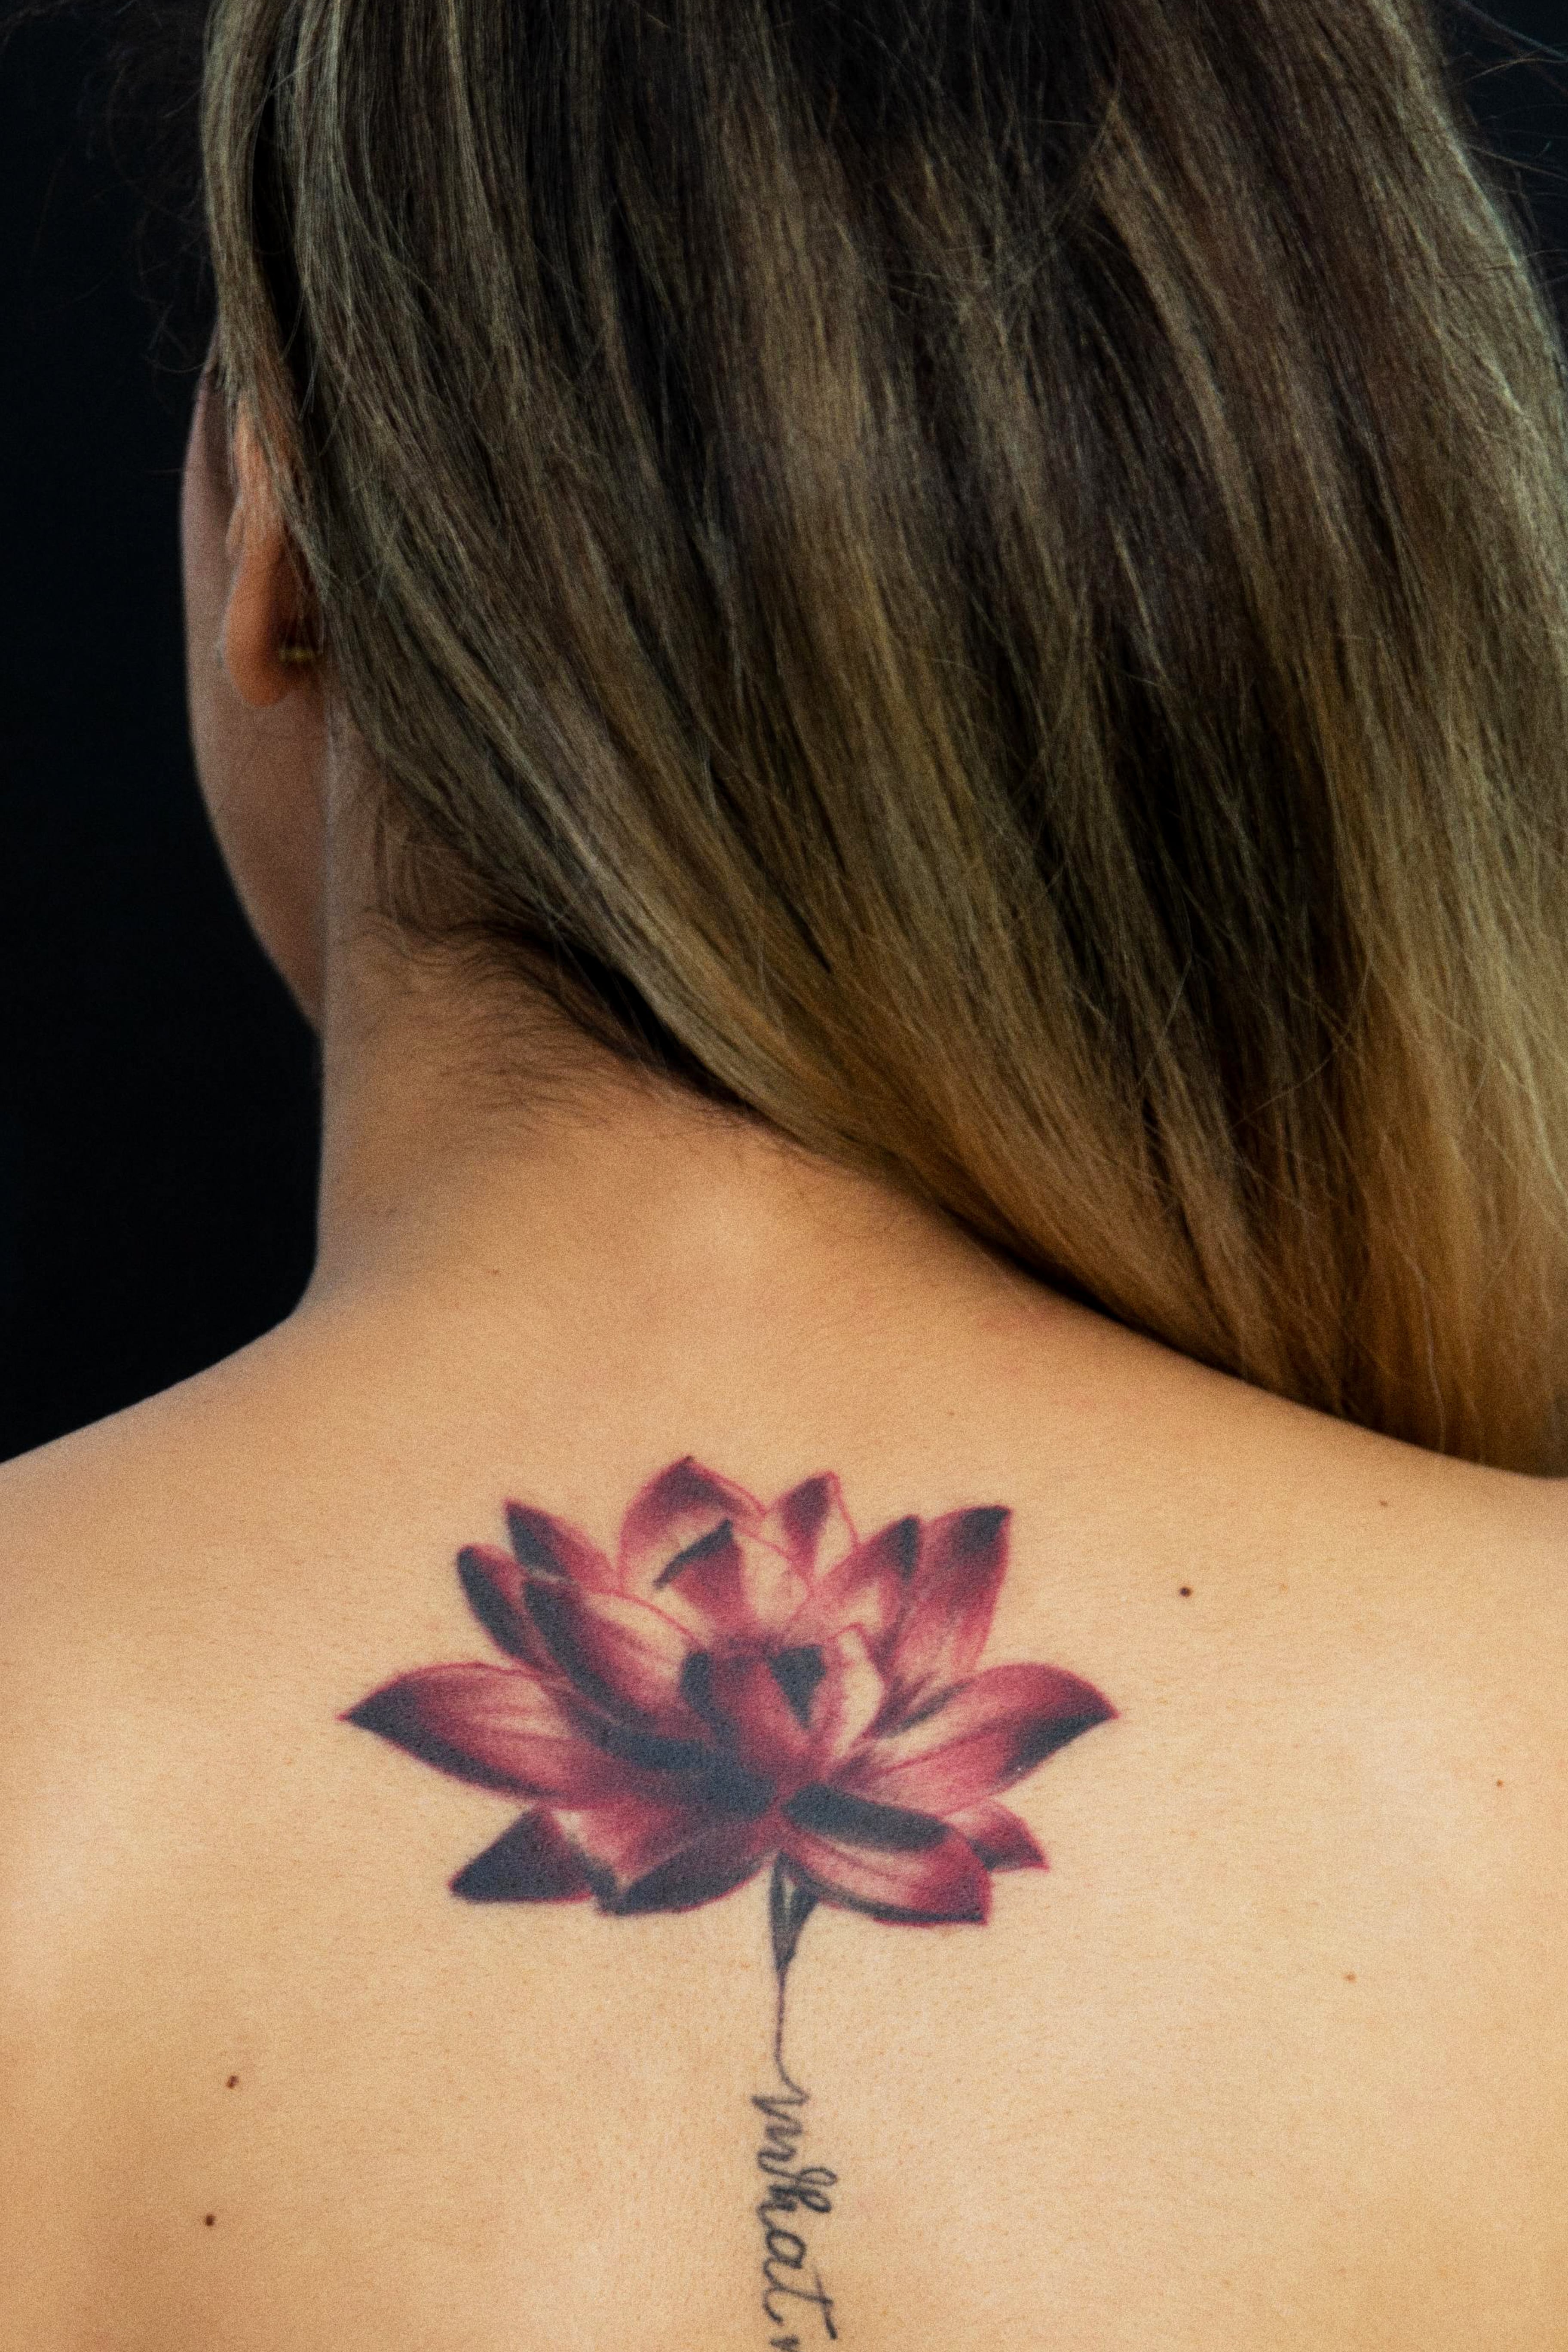 Beautiful Woman with a Lotus Flower Bare Shoulders and Beauty